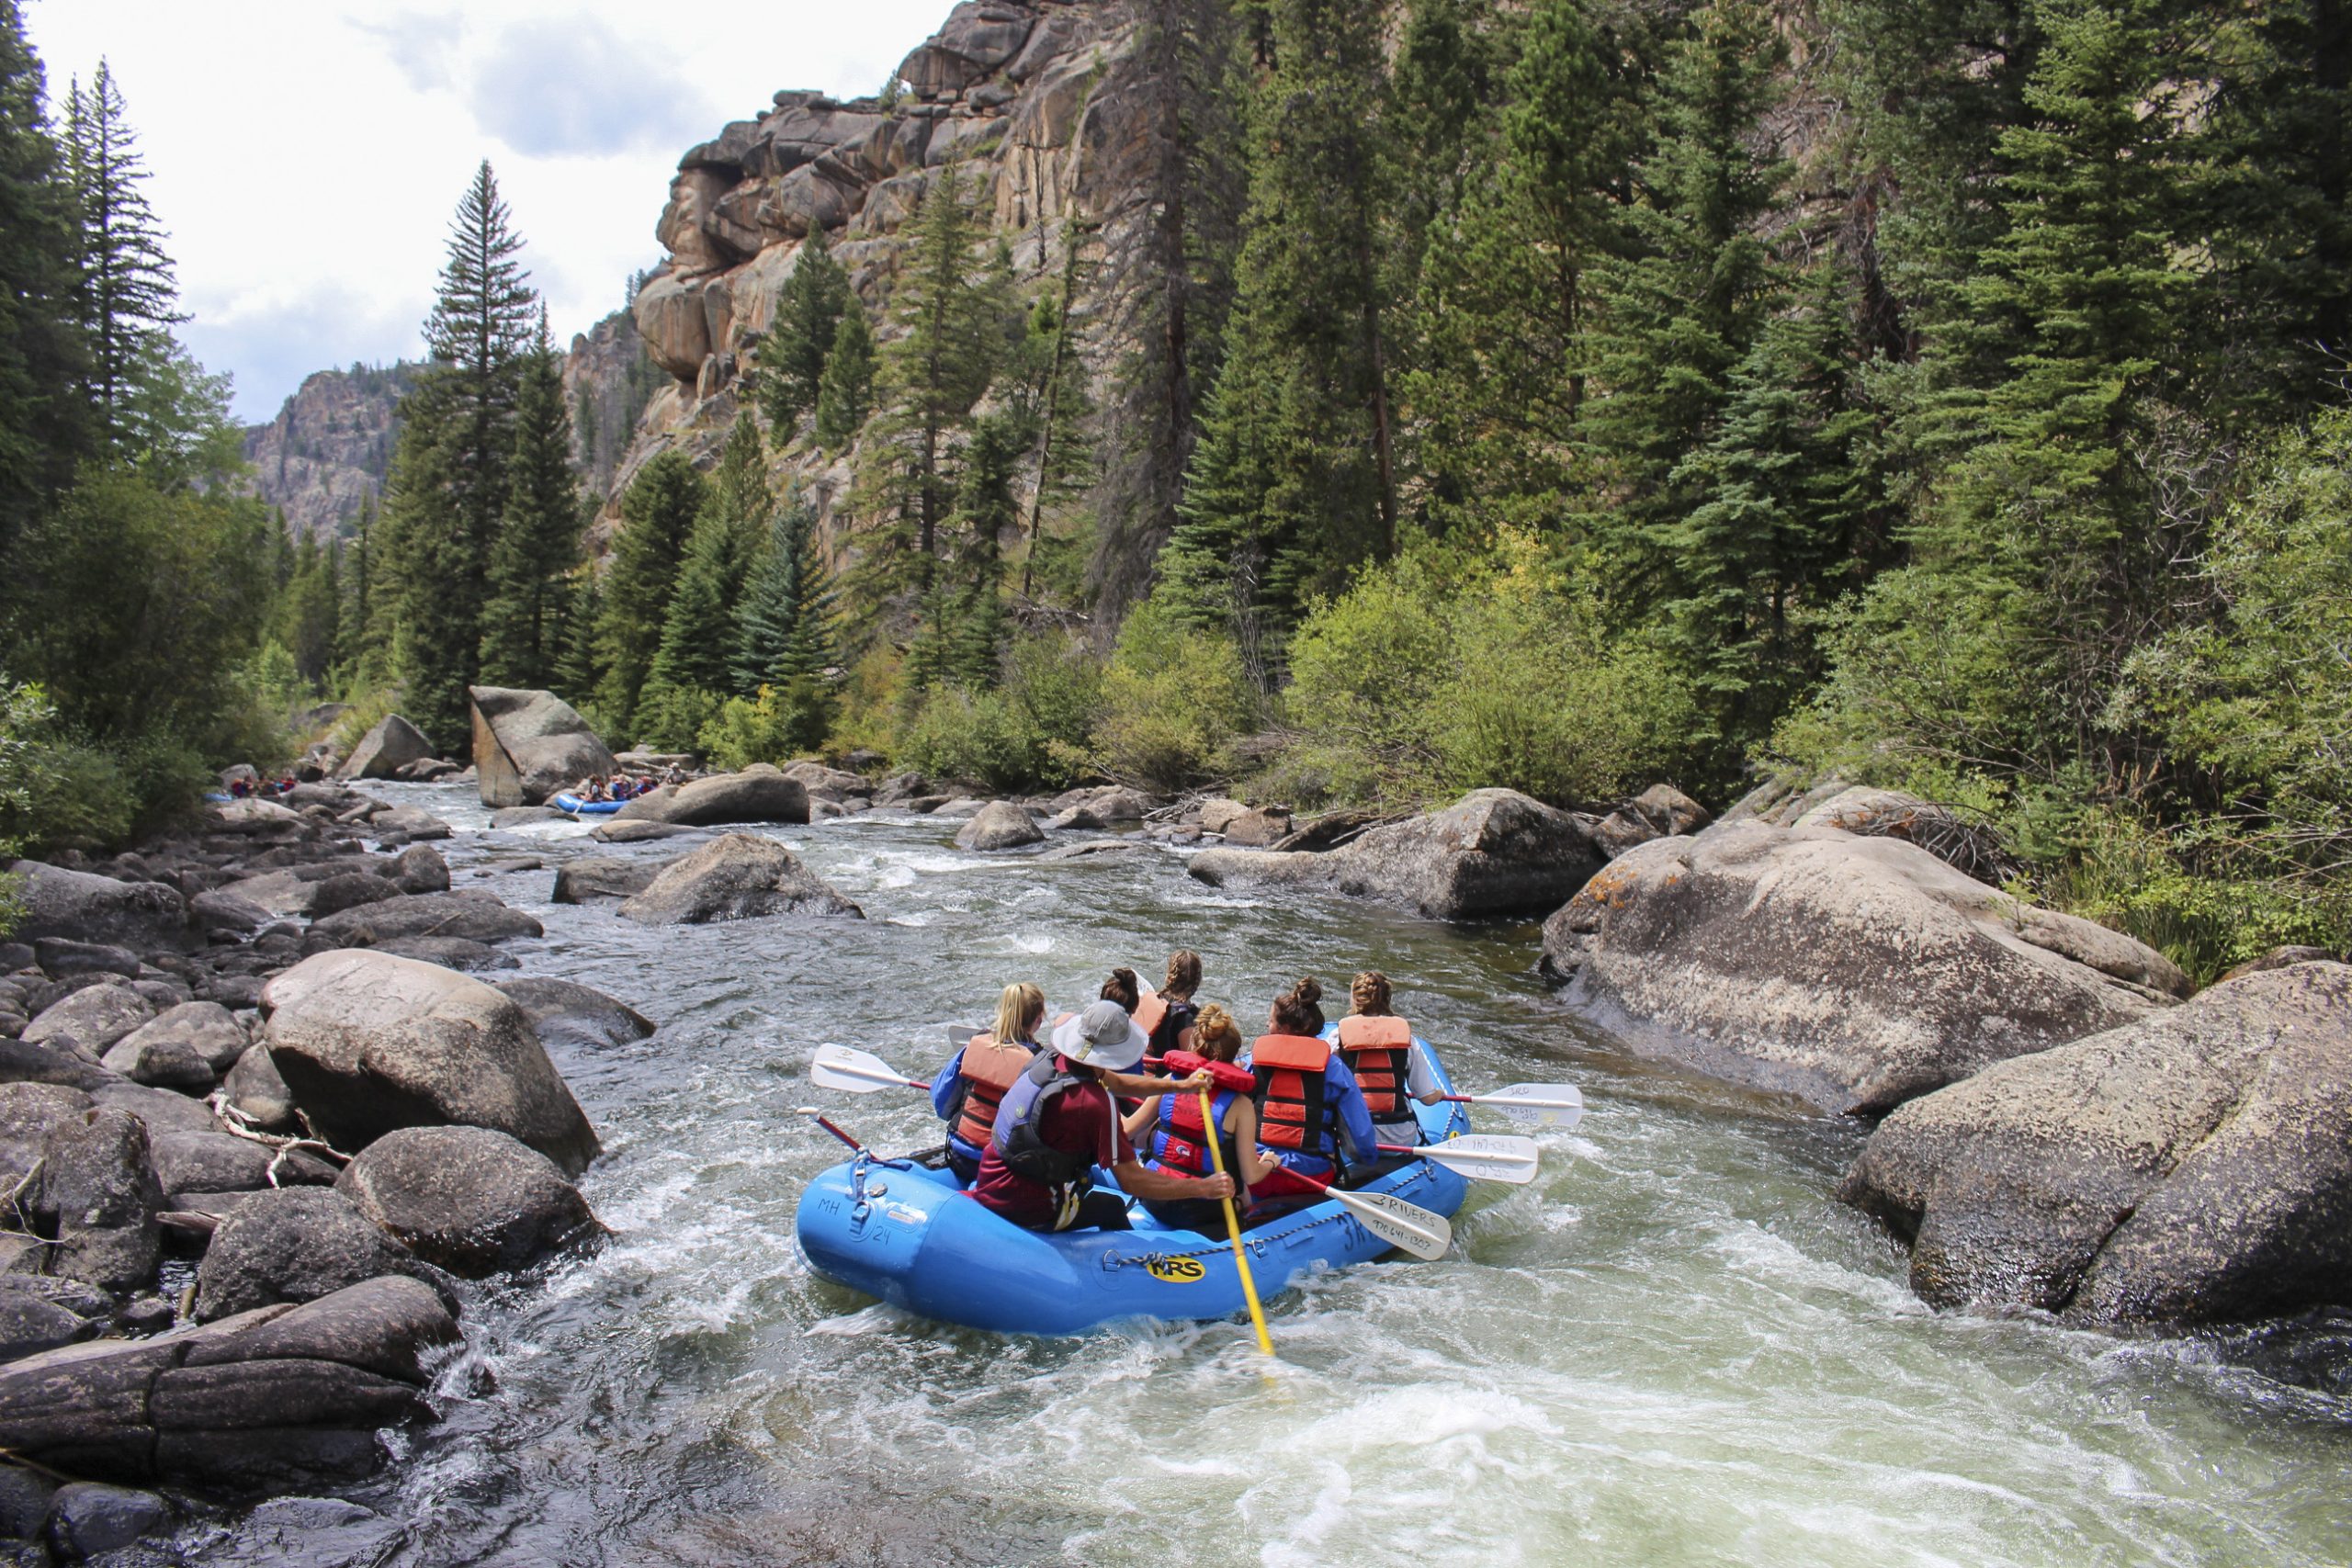 A group of seven people sit in an inflatable raft on a whitewater river with rocks